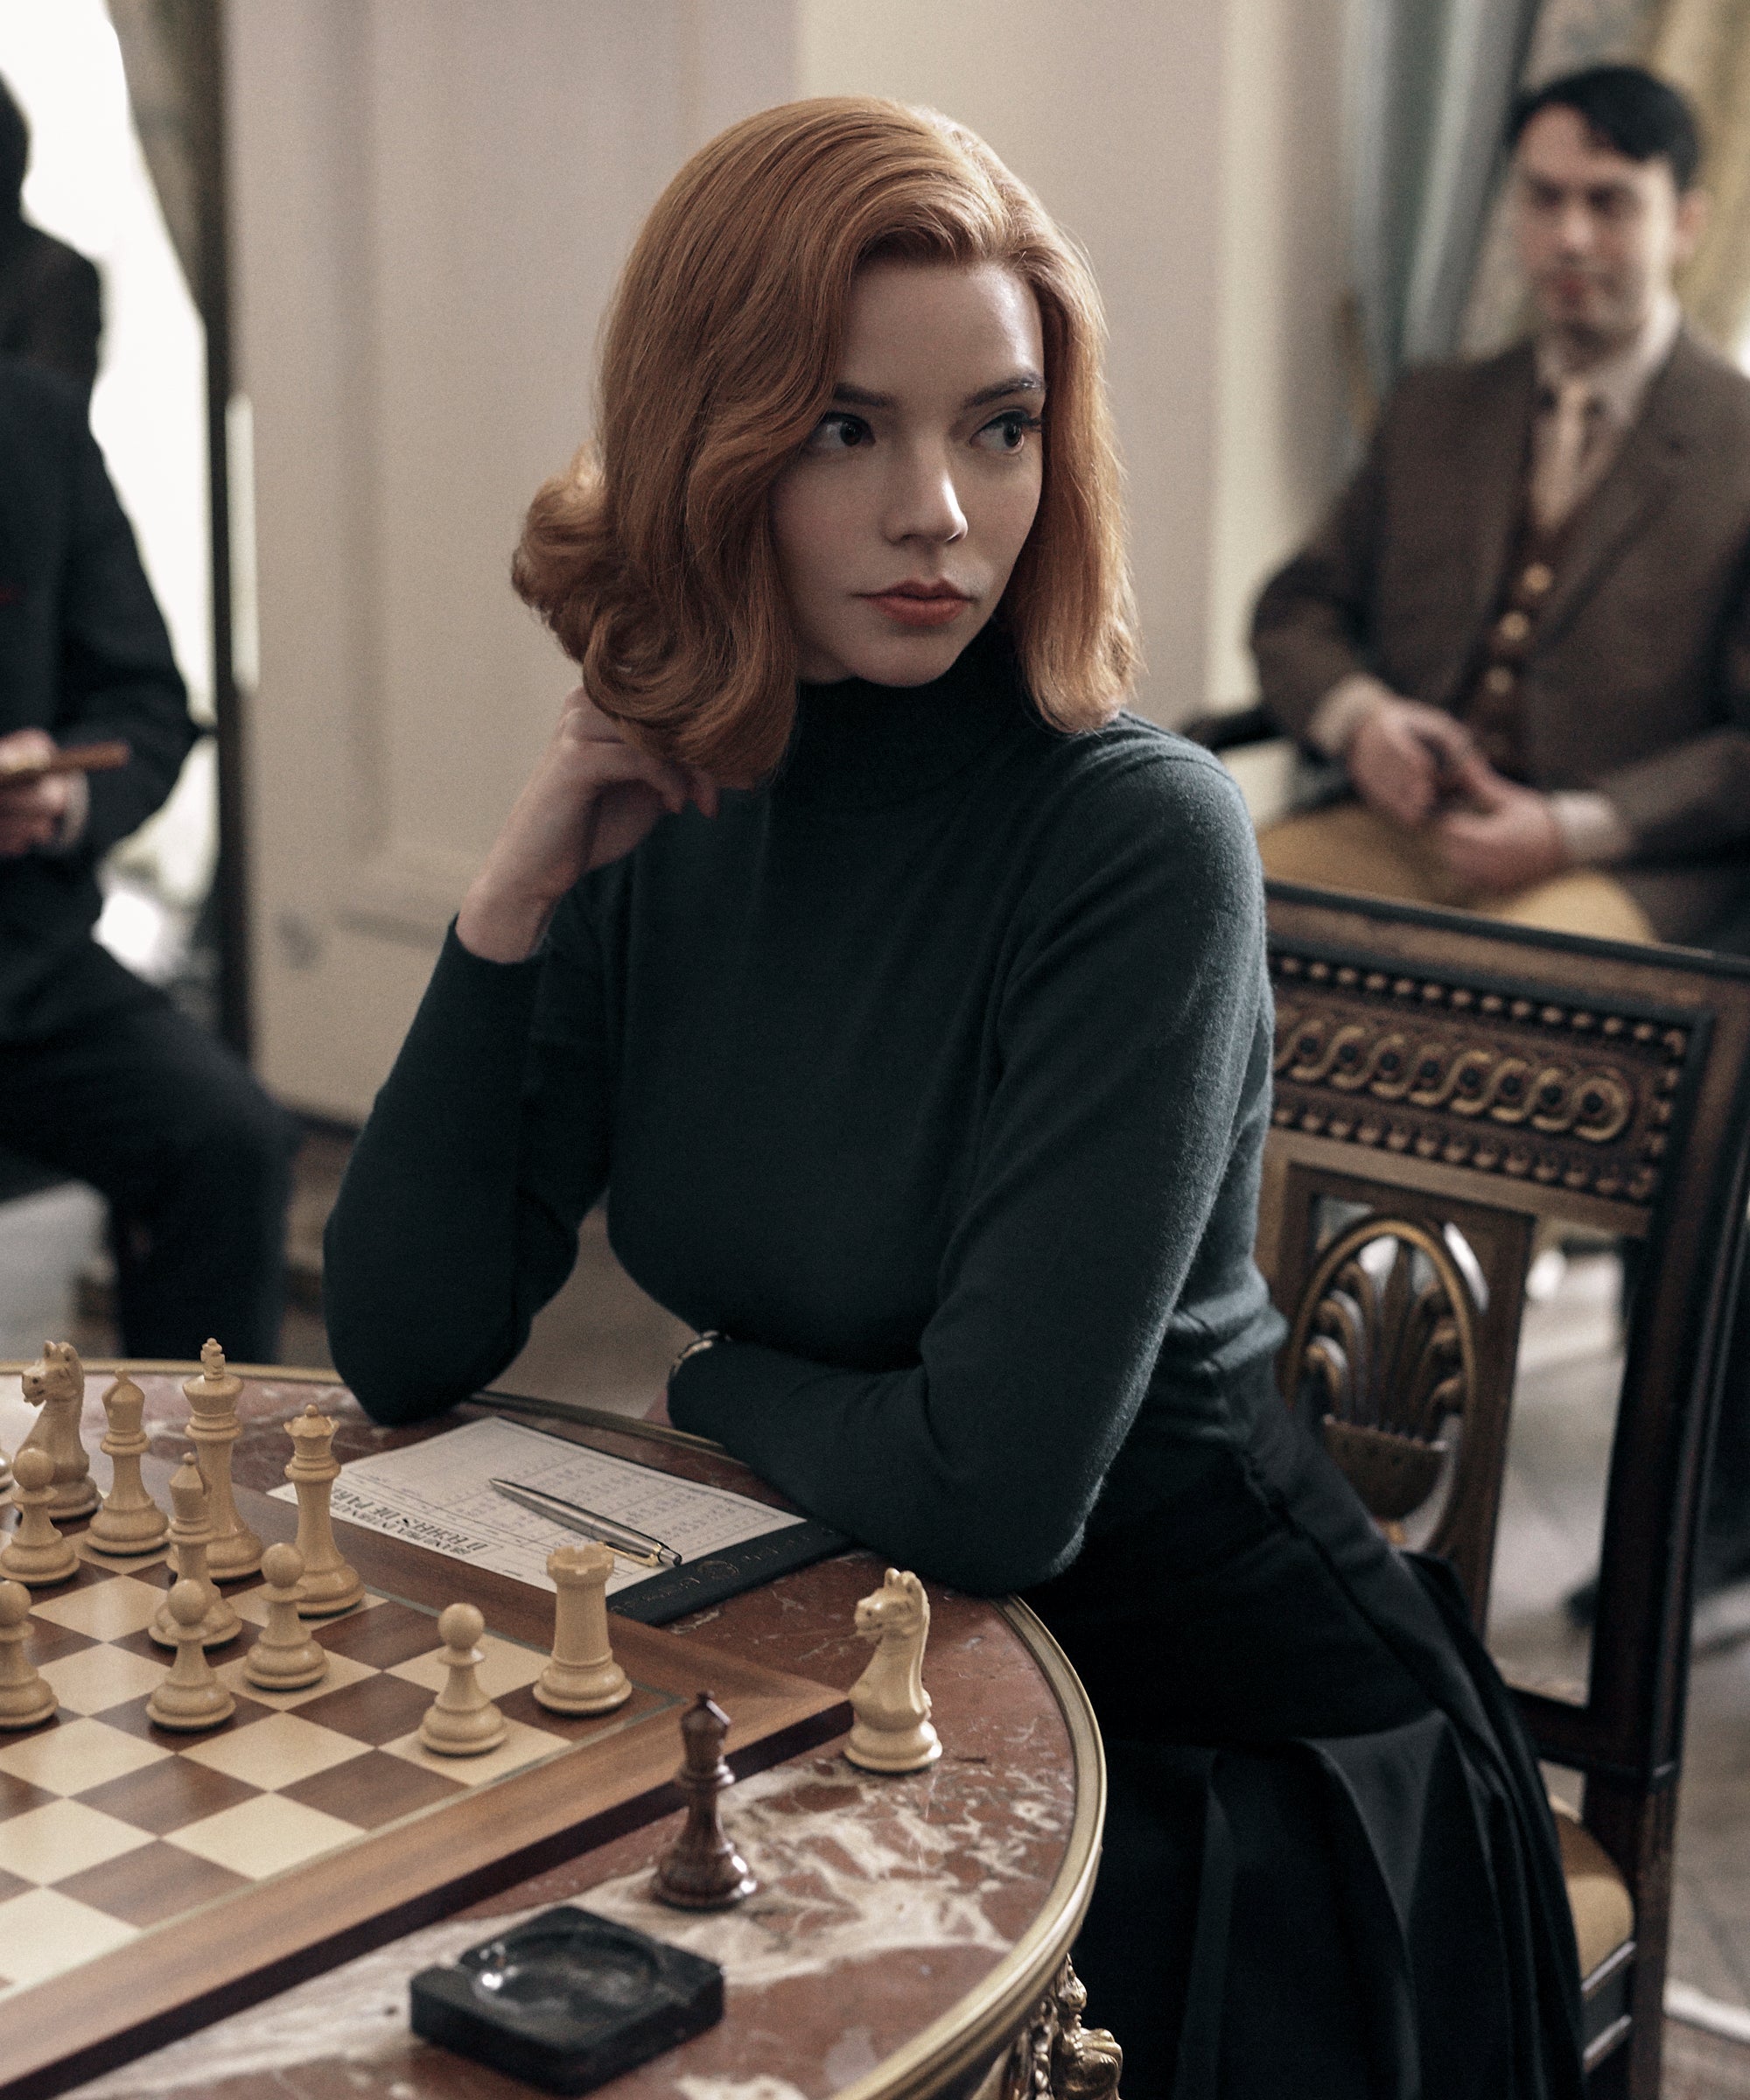 Could A 'The Queen's Gambit' Chess Game Be Headed to Netflix Games